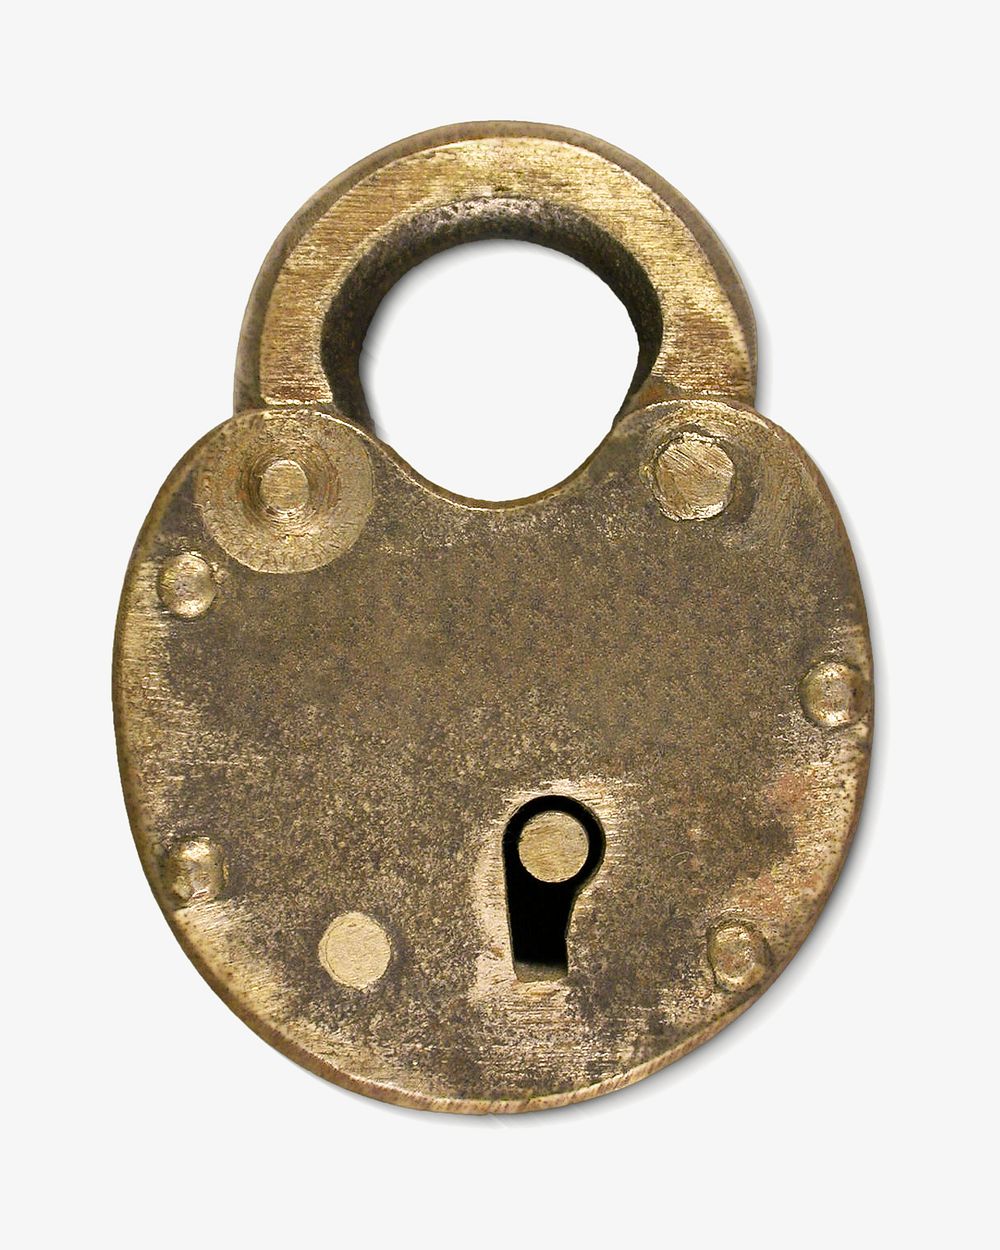 Vintage padlock, old object designed by H. C. Jones. Remixed by rawpixel.